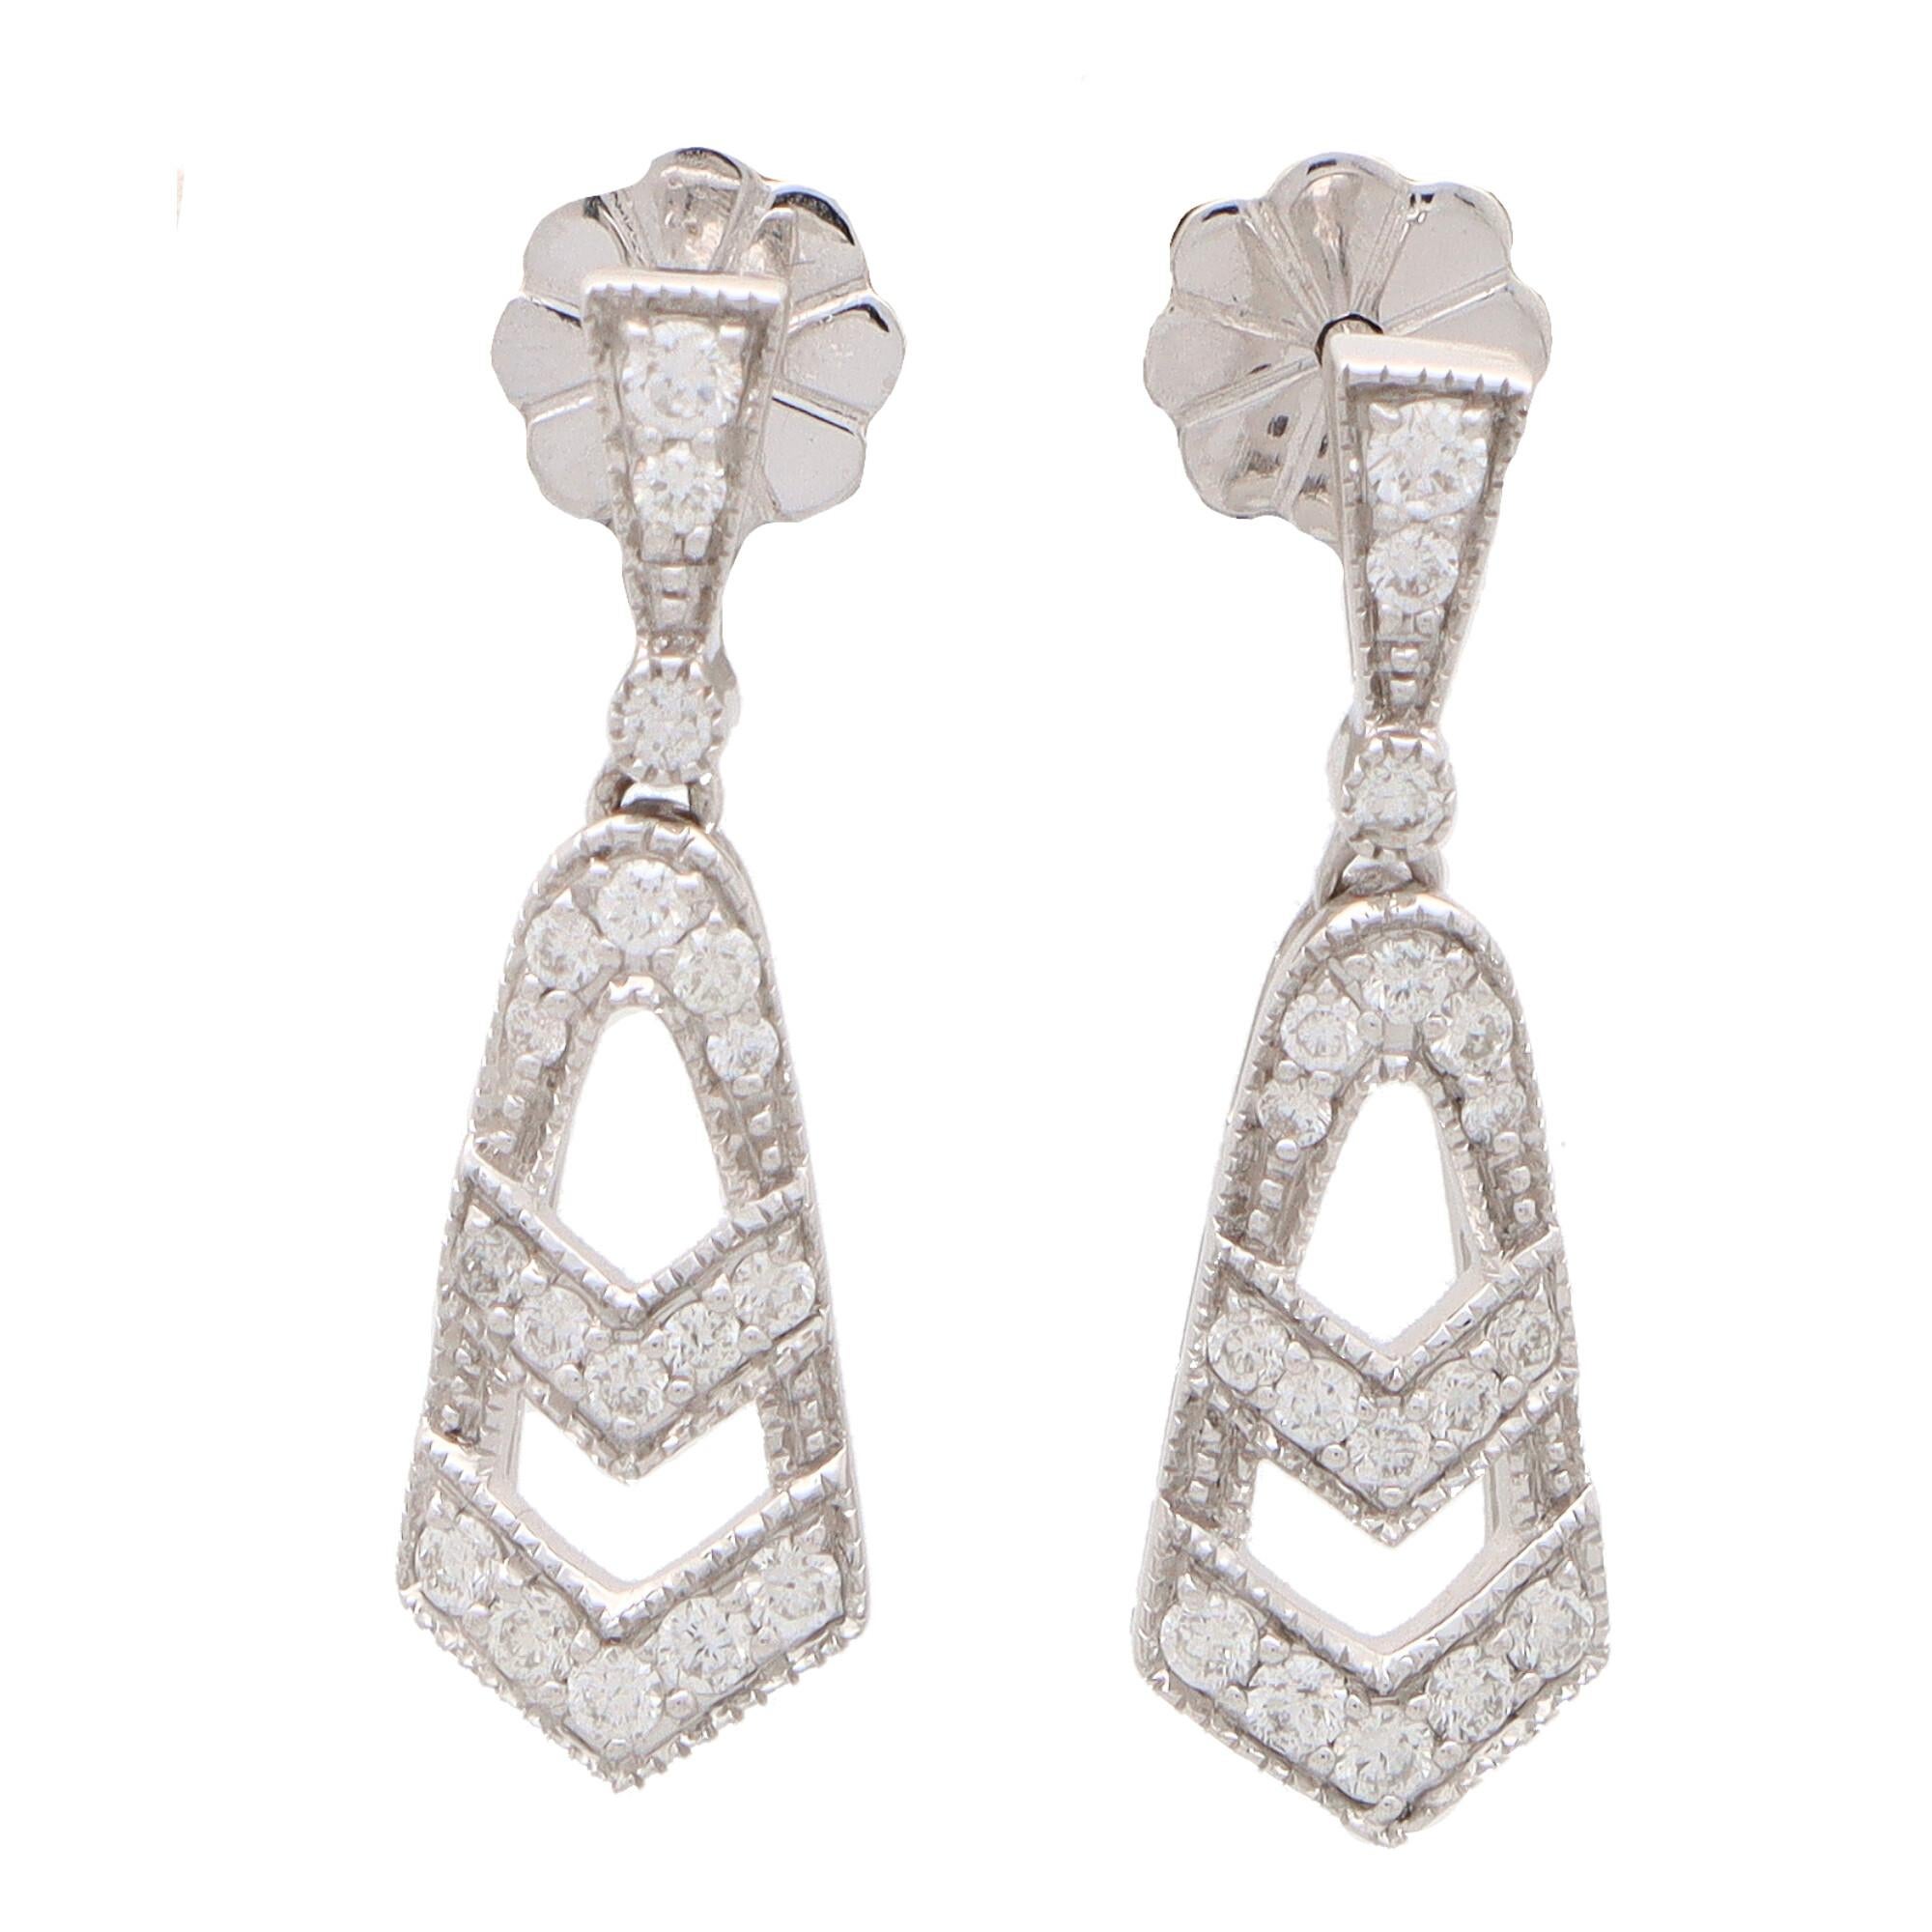  A beautiful pair of Art Deco inspired diamond drop earrings set in 18k white gold.

Echoing that of the Art Deco era, each earring is composed of an openwork diamond drop. The drop hangs from a matching diamond set bail and the earrings are secured